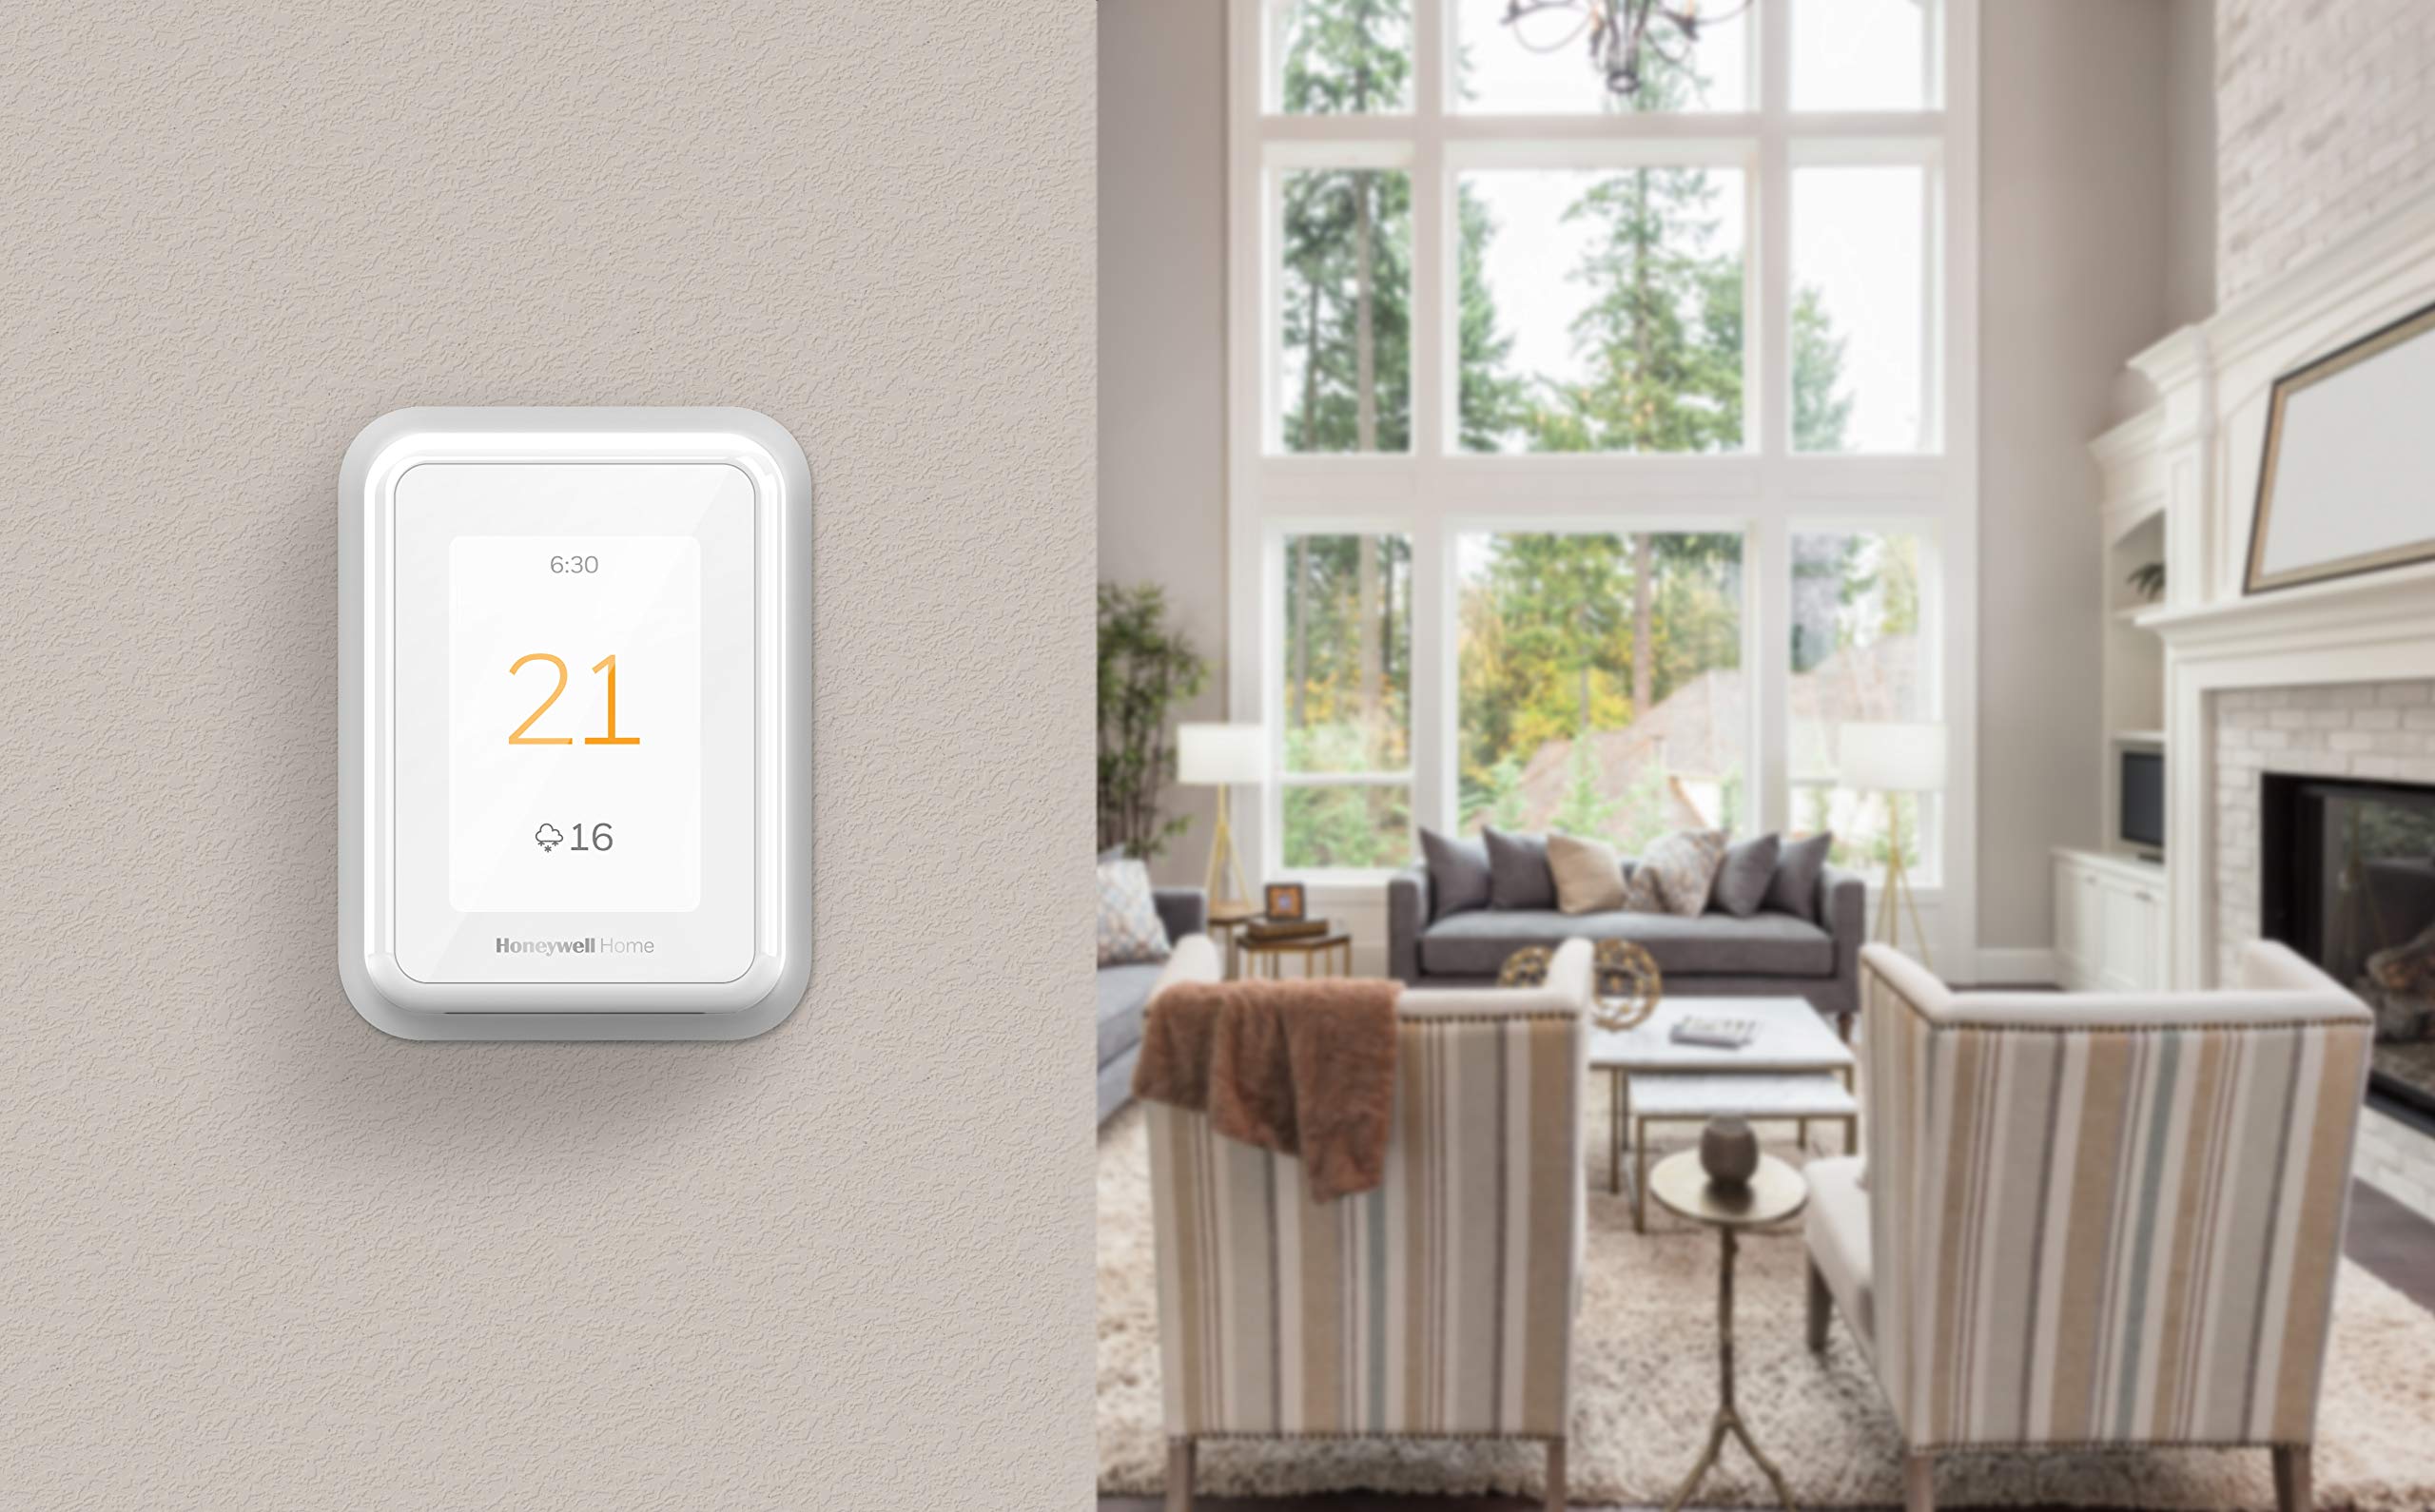 T9 Smart Wi-Fi Programmable Thermostat - With 7 Day Scheduling  - Like New